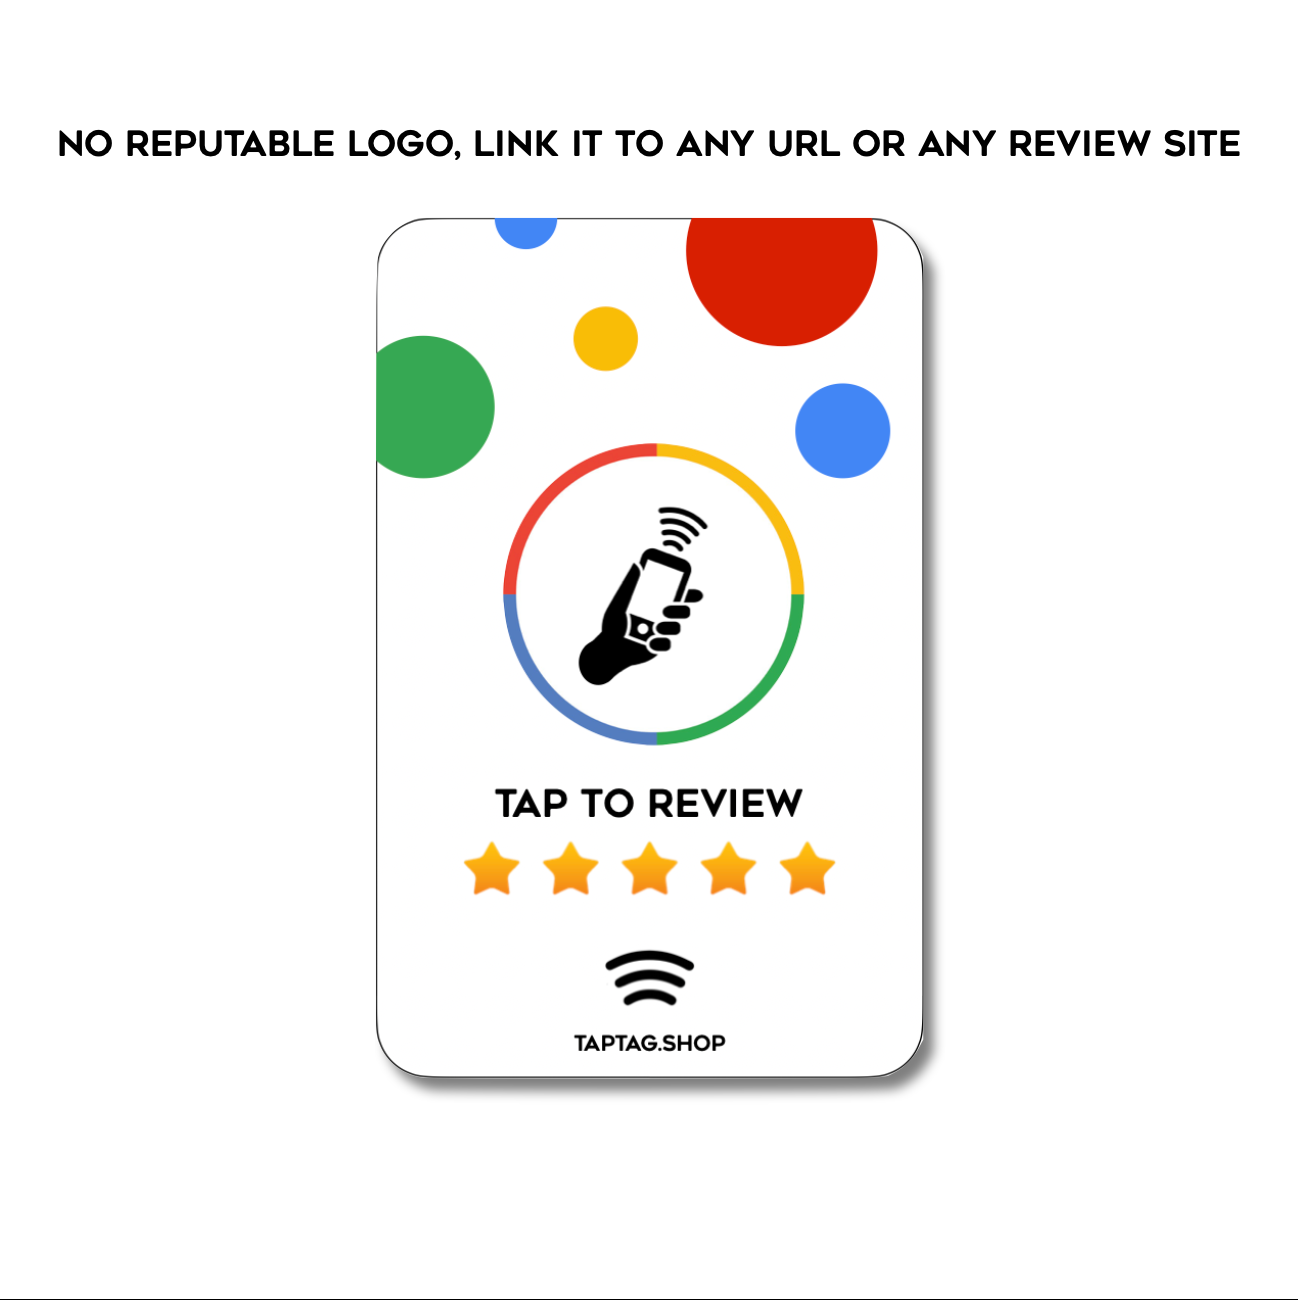 Tap Review Card